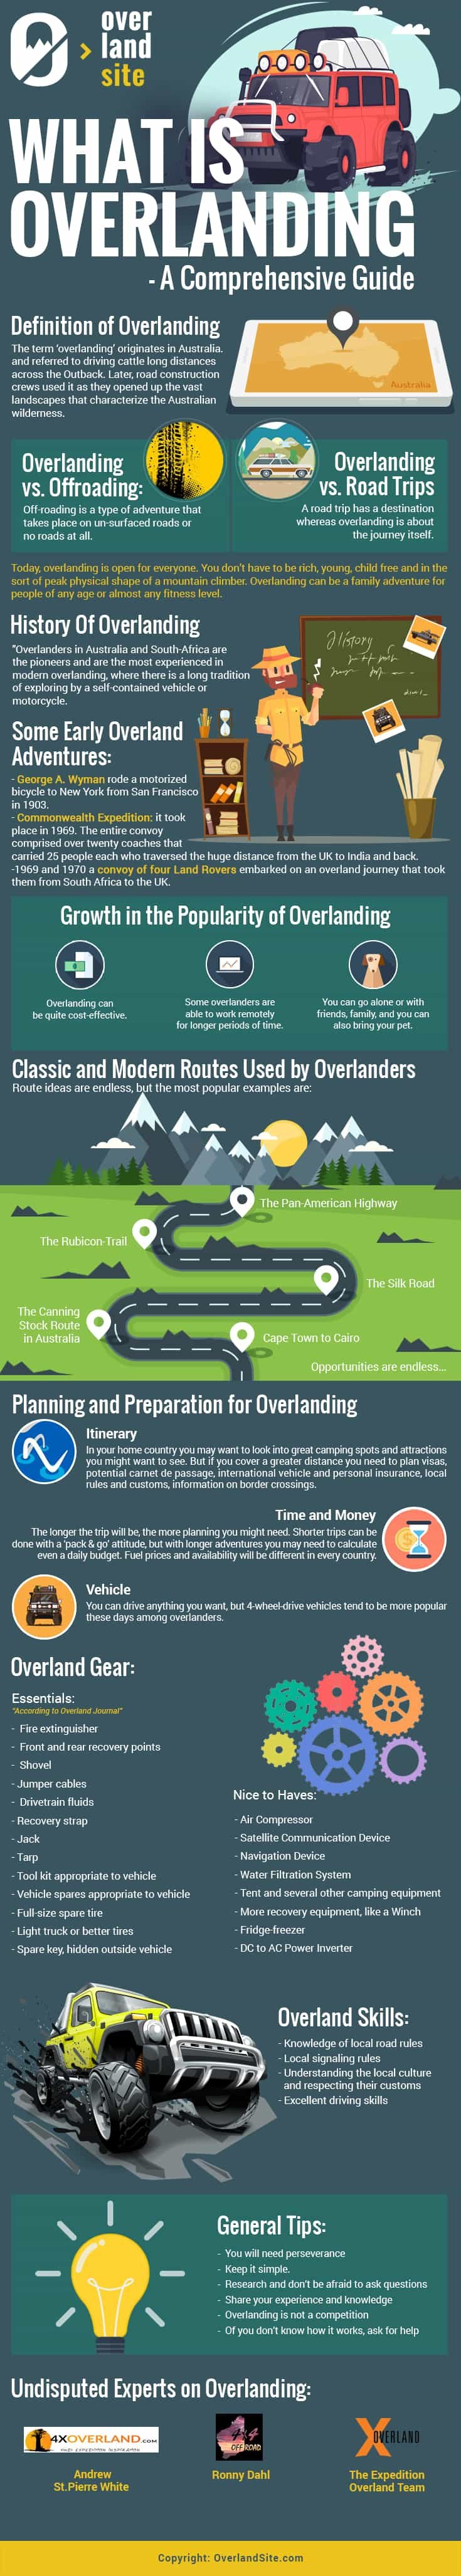 infographic explaining what overlanding is